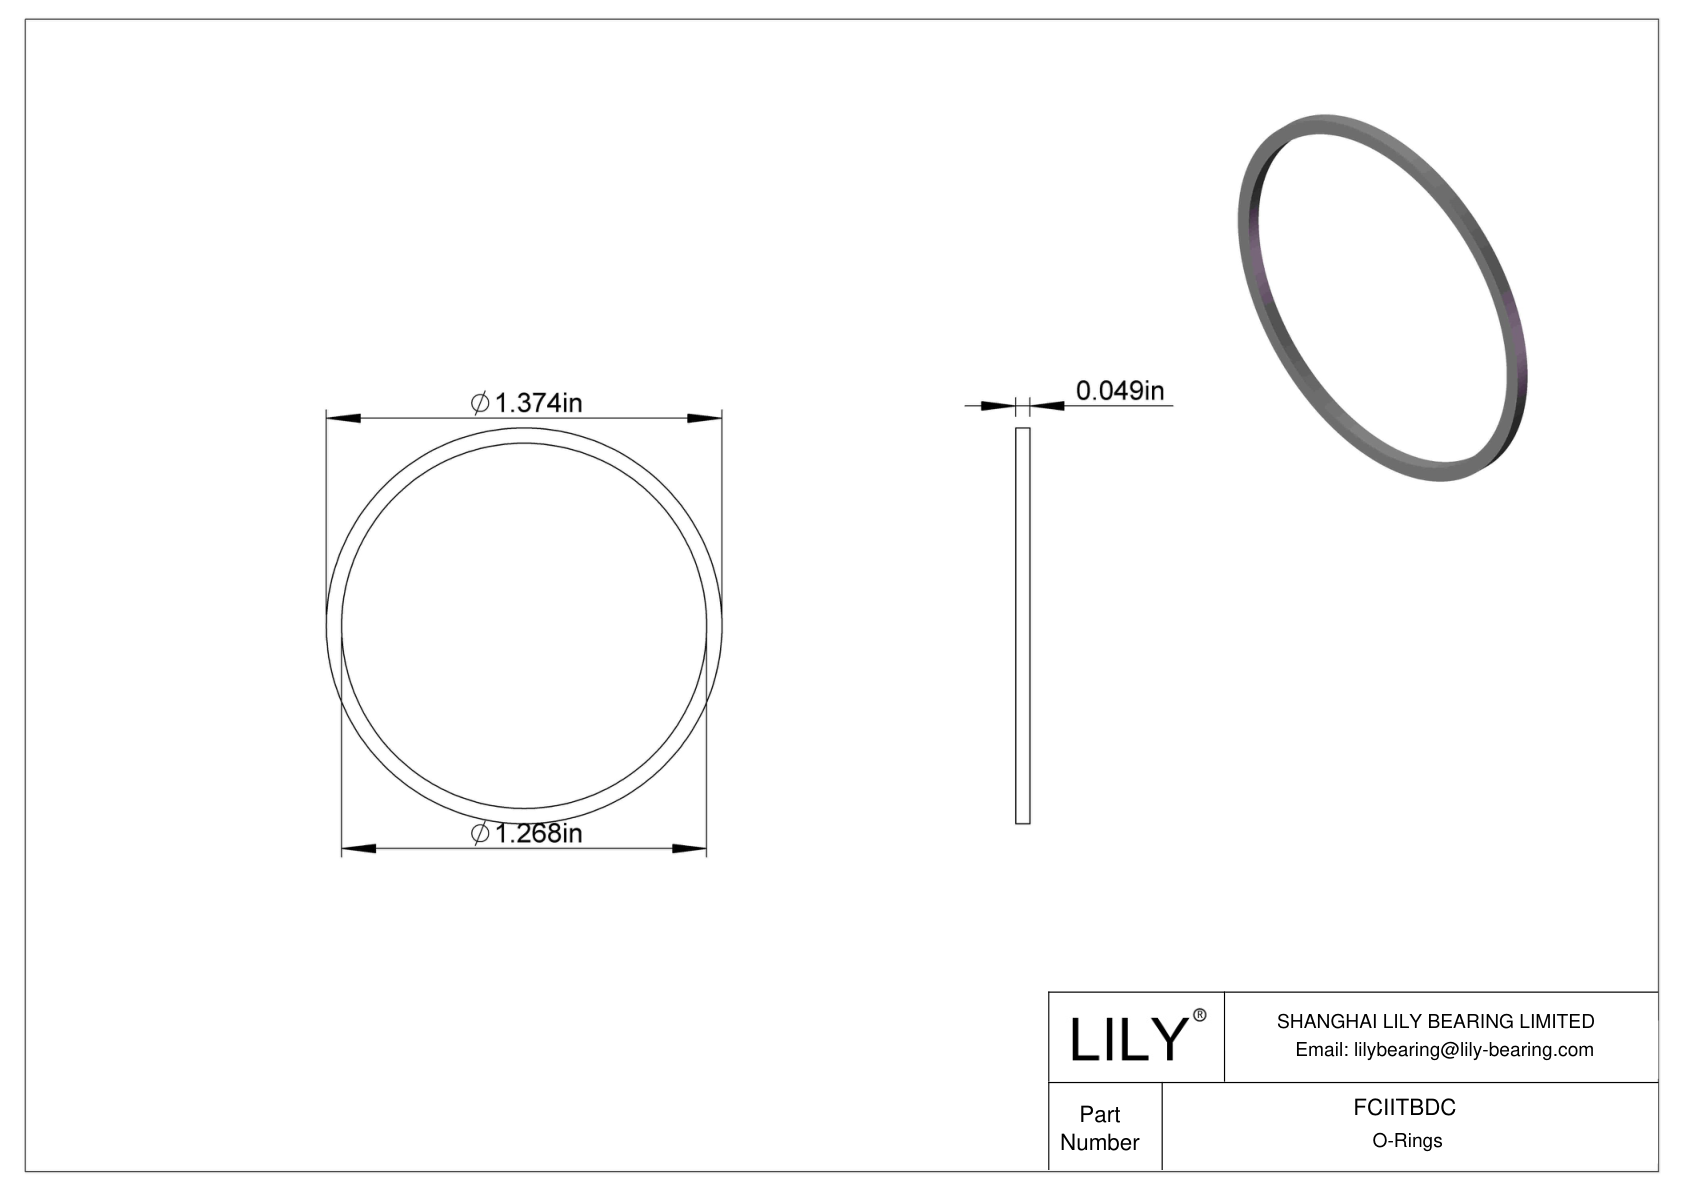 FCIITBDC O-Ring Backup Rings cad drawing